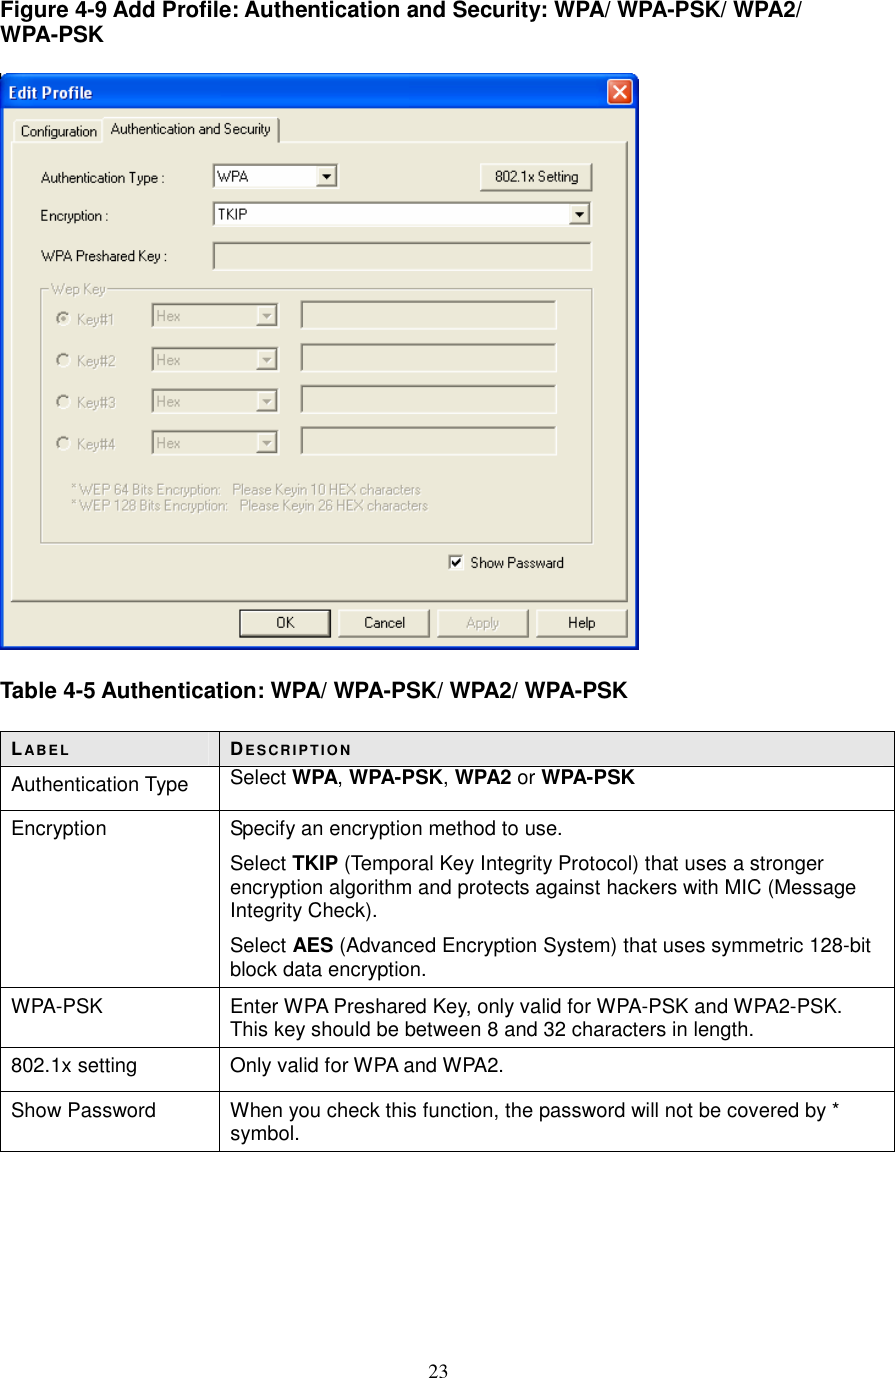  23 Figure 4-9 Add Profile: Authentication and Security: WPA/ WPA-PSK/ WPA2/ WPA-PSK    Table 4-5 Authentication: WPA/ WPA-PSK/ WPA2/ WPA-PSK  LABE L DE S CR IP T IO N Authentication Type  Select WPA, WPA-PSK, WPA2 or WPA-PSK Encryption  Specify an encryption method to use. Select TKIP (Temporal Key Integrity Protocol) that uses a stronger encryption algorithm and protects against hackers with MIC (Message Integrity Check). Select AES (Advanced Encryption System) that uses symmetric 128-bit block data encryption. WPA-PSK  Enter WPA Preshared Key, only valid for WPA-PSK and WPA2-PSK. This key should be between 8 and 32 characters in length. 802.1x setting  Only valid for WPA and WPA2. Show Password  When you check this function, the password will not be covered by * symbol.      